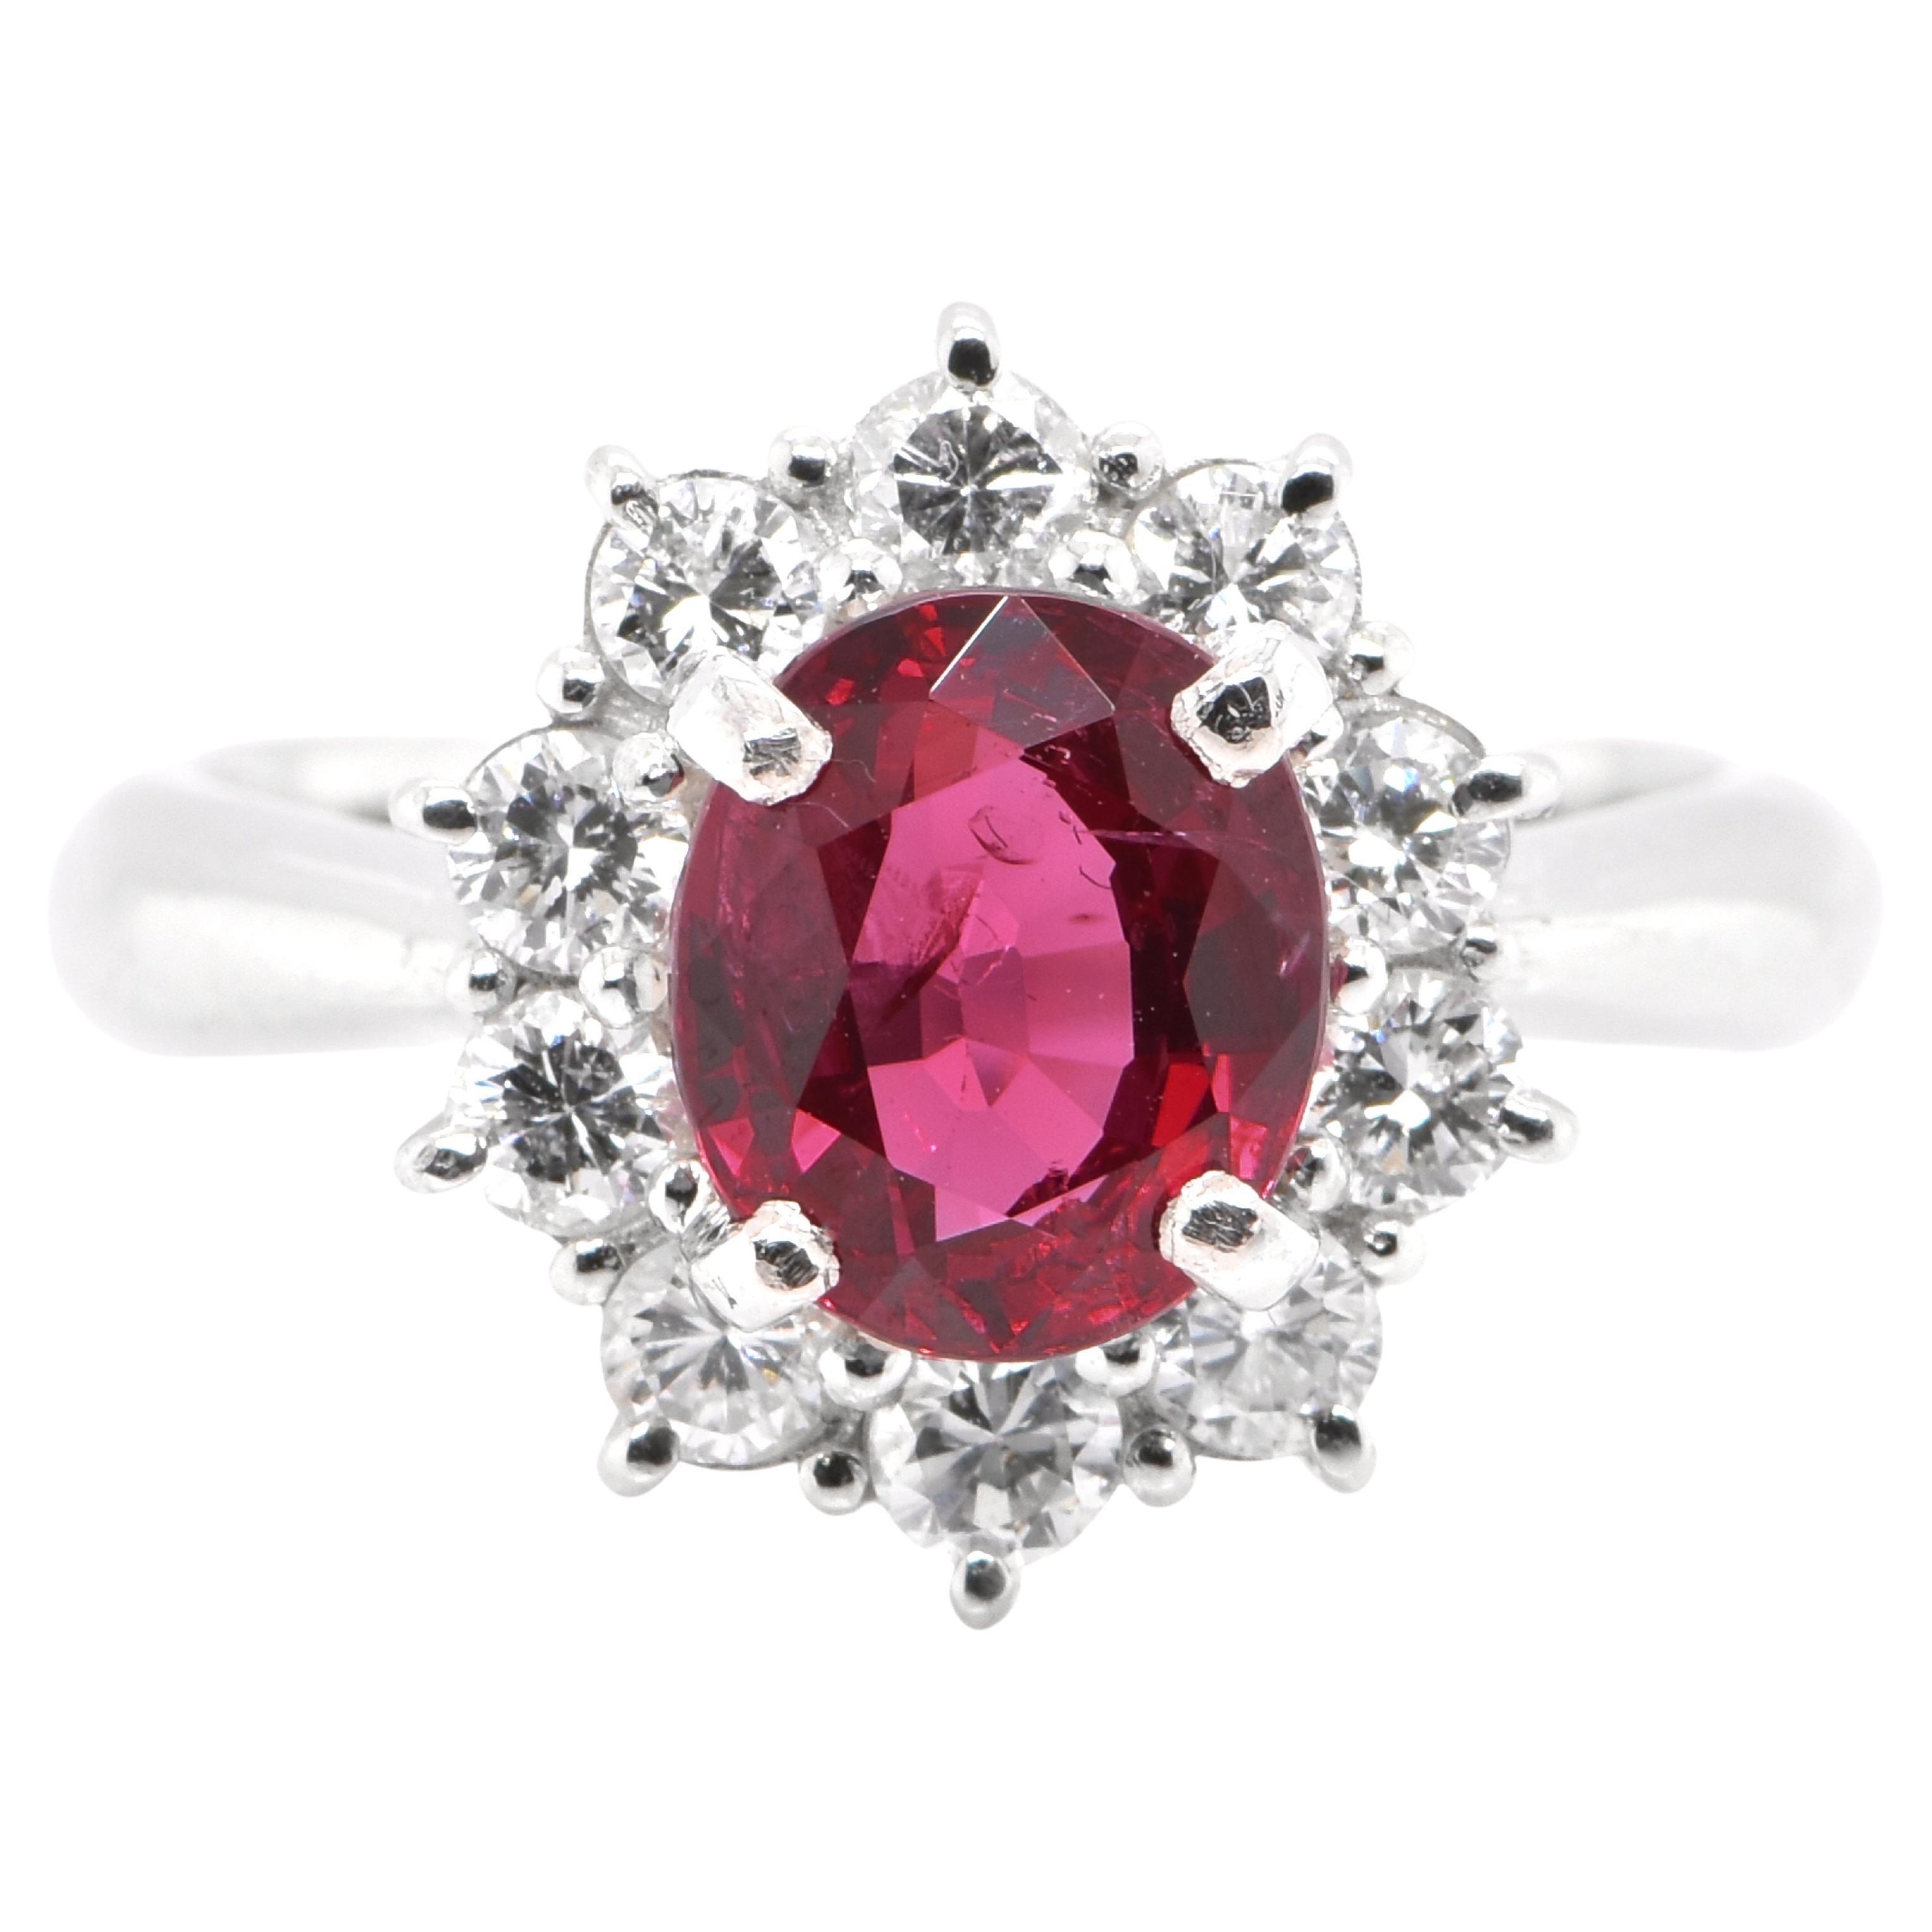 1.83 Carat Natural Red Spinel and Diamond Halo Ring Set in Platinum